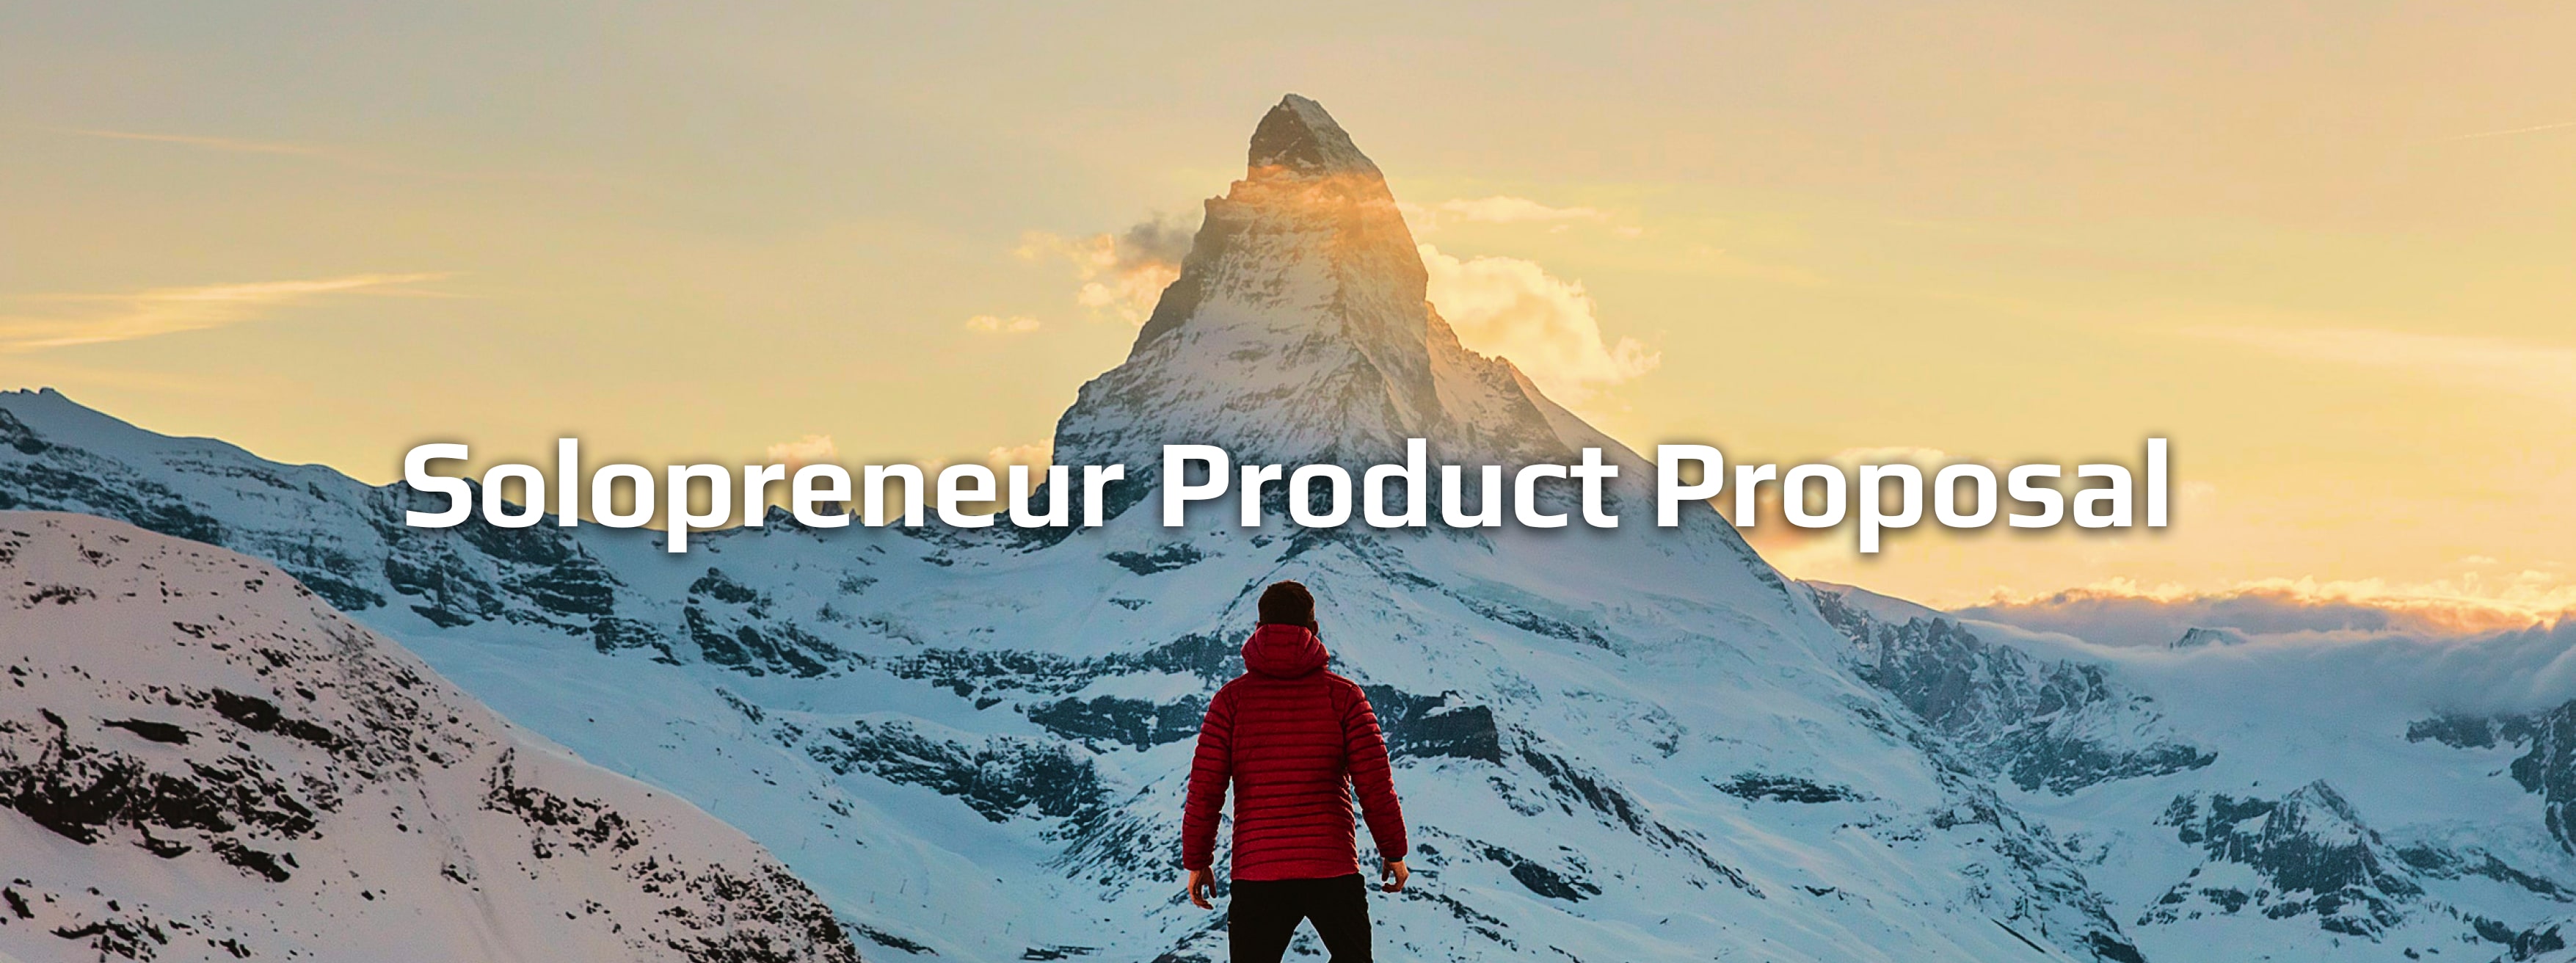 solopreneur product proposal image